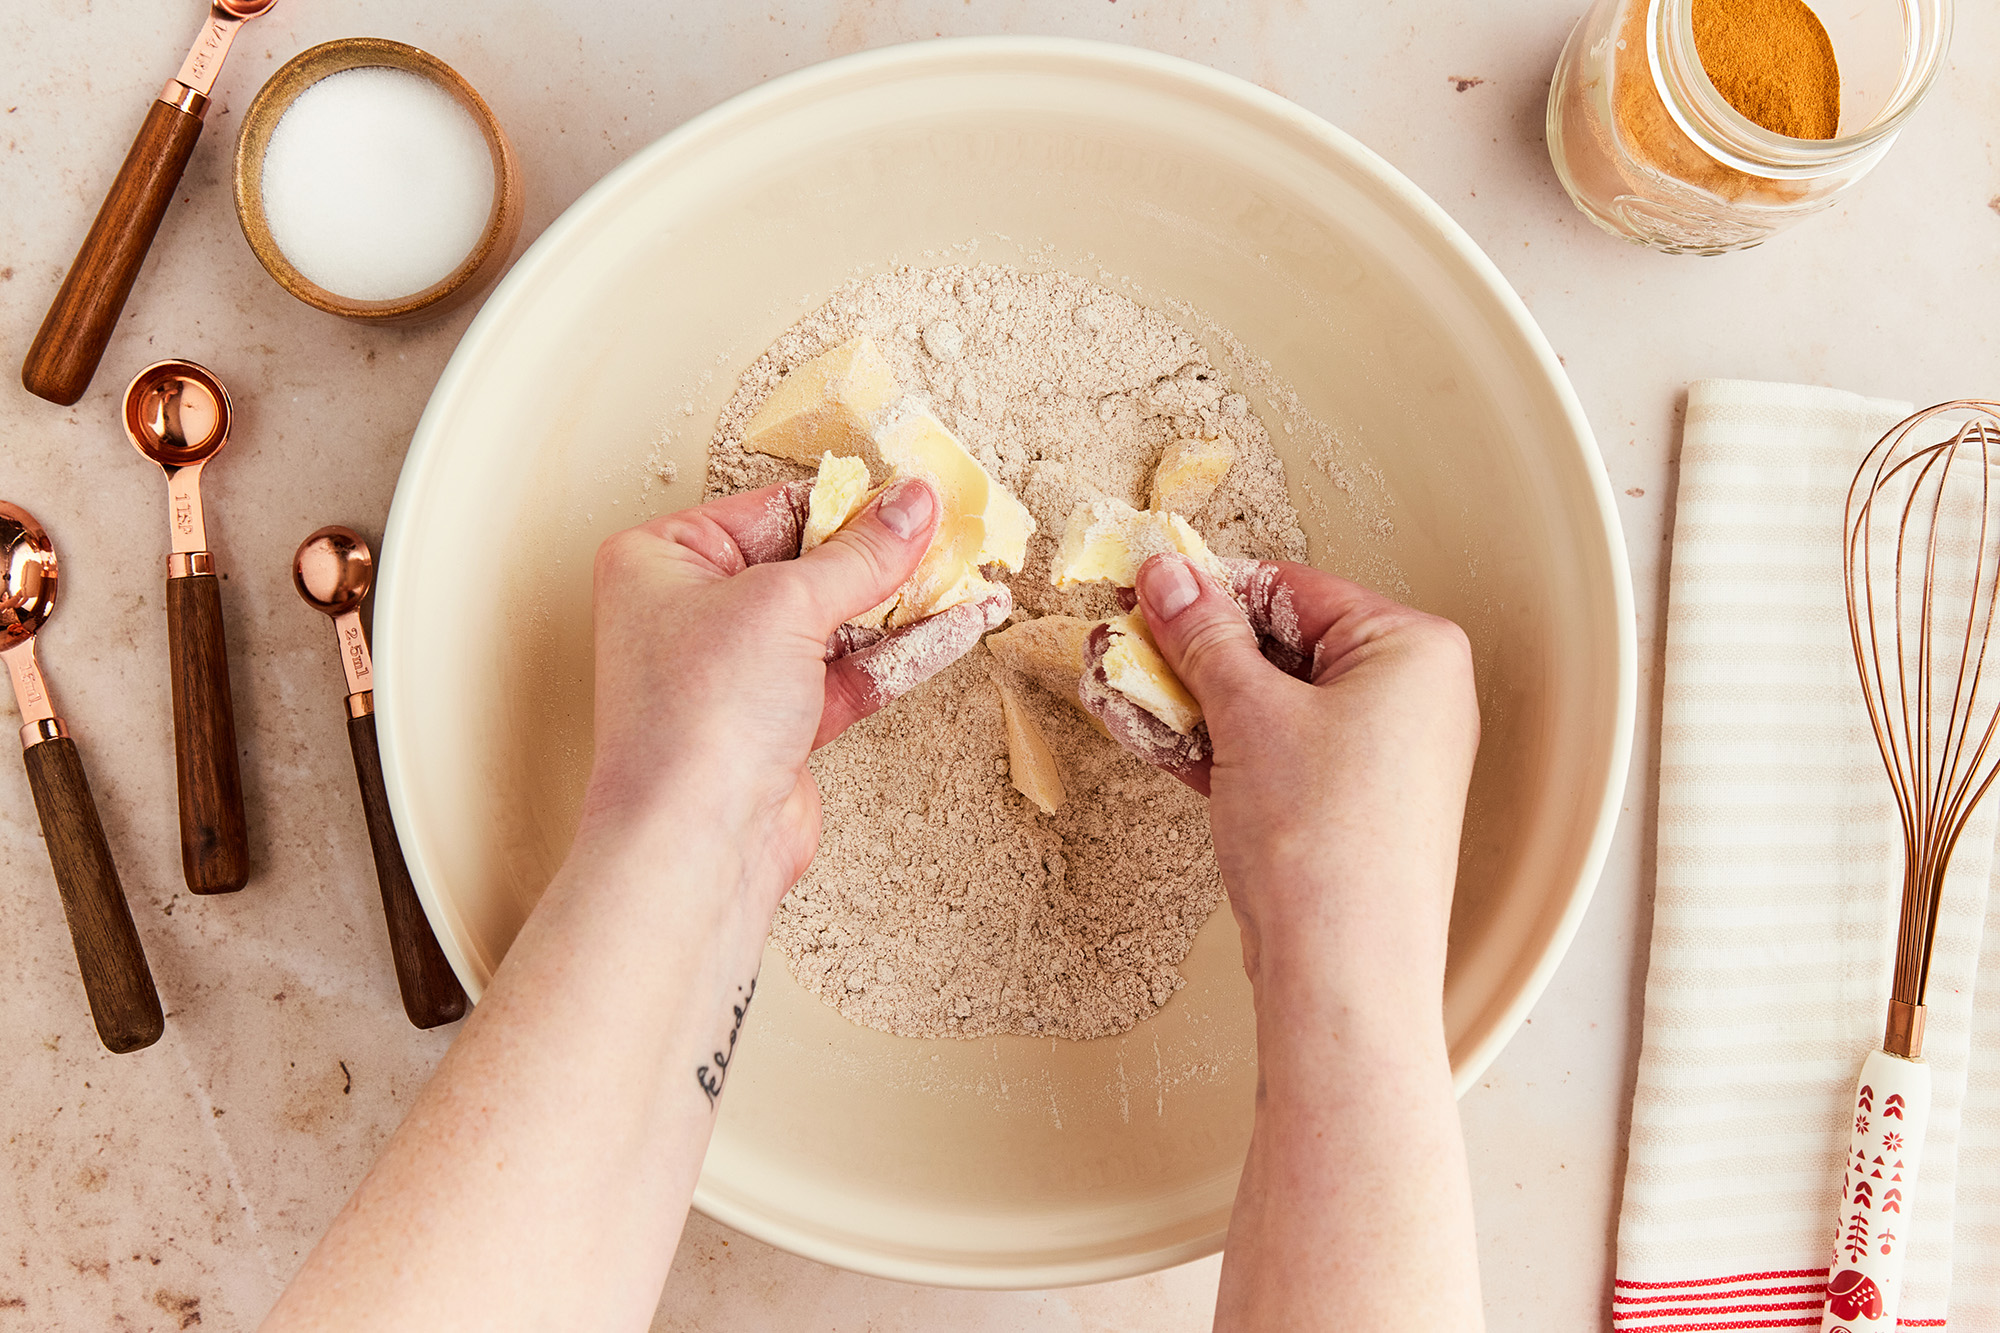 Using hands to break apart ingredients into a bowl.